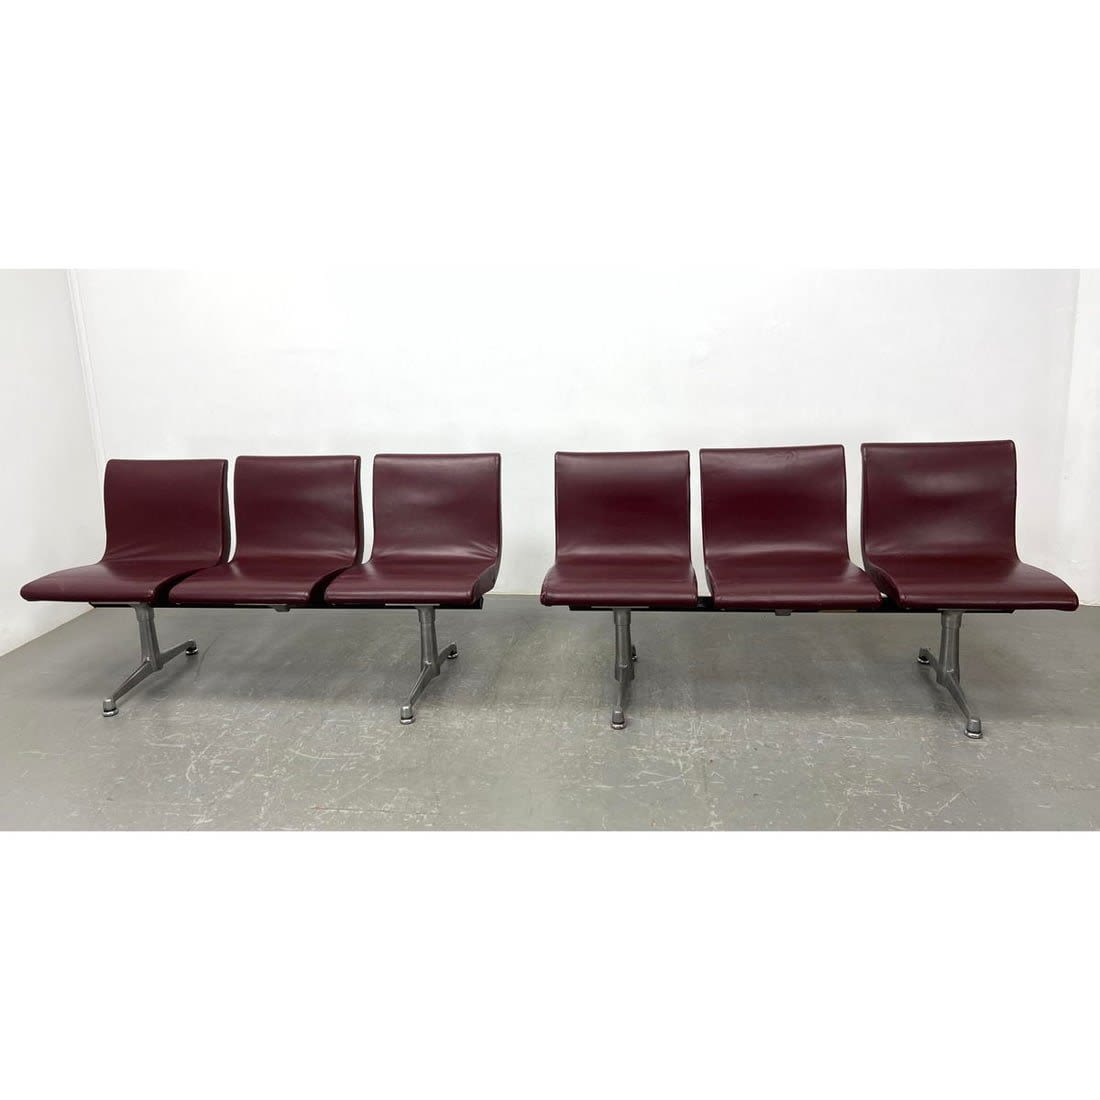 Pr Italy Modernist 3 Seater Commercial 3cf51d